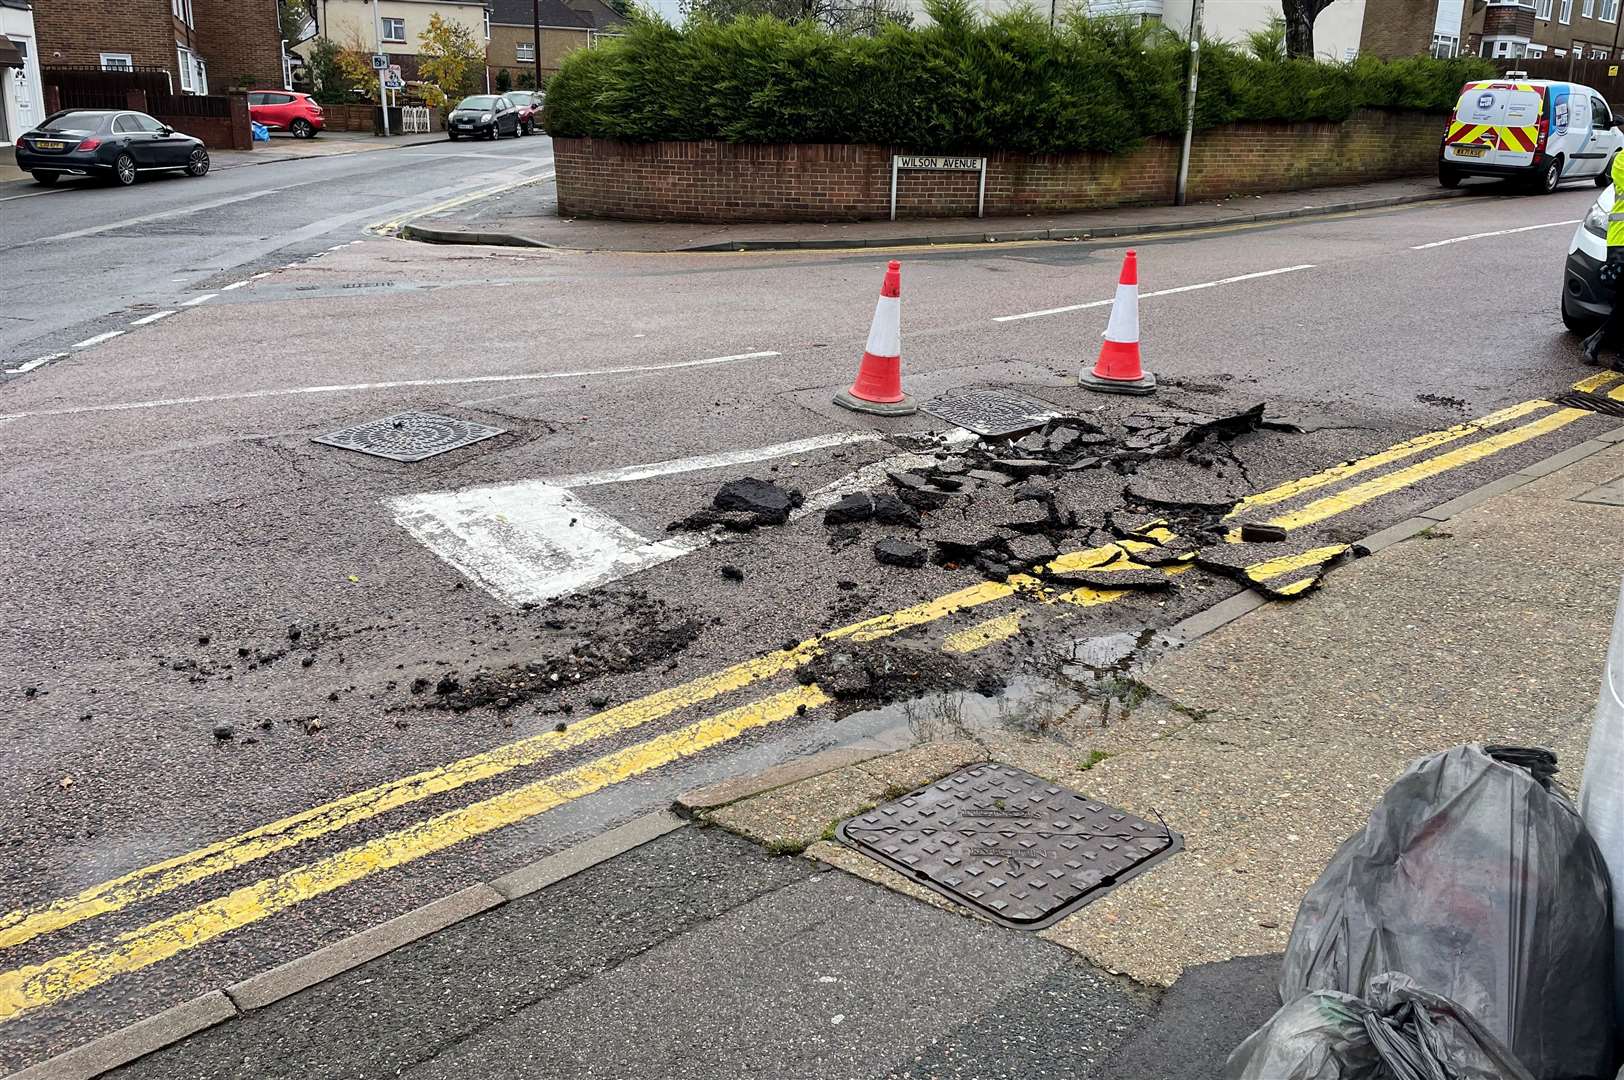 The storm has caused damage to part of the road in Wilson Avenue, Rochester